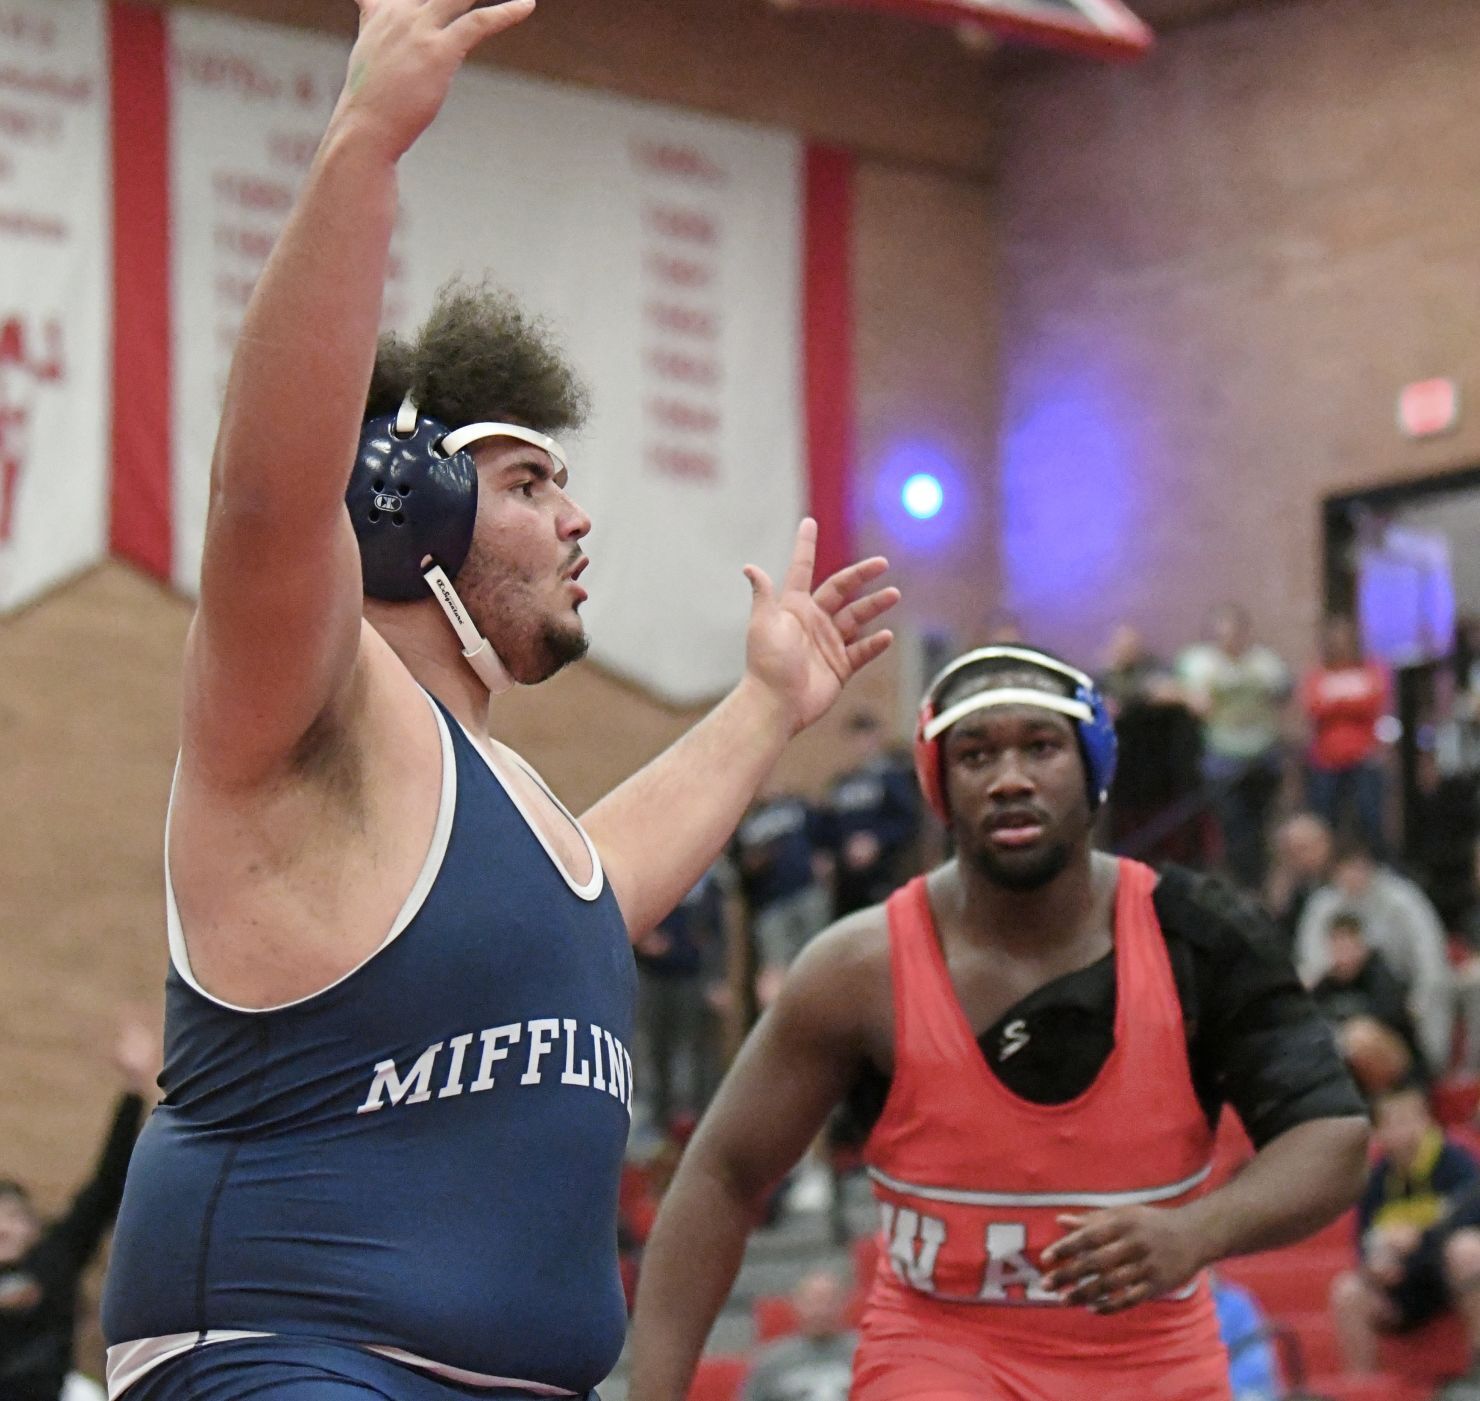 H.S. Wrestling: Warrior Run, Meadowbrook have strong showings at